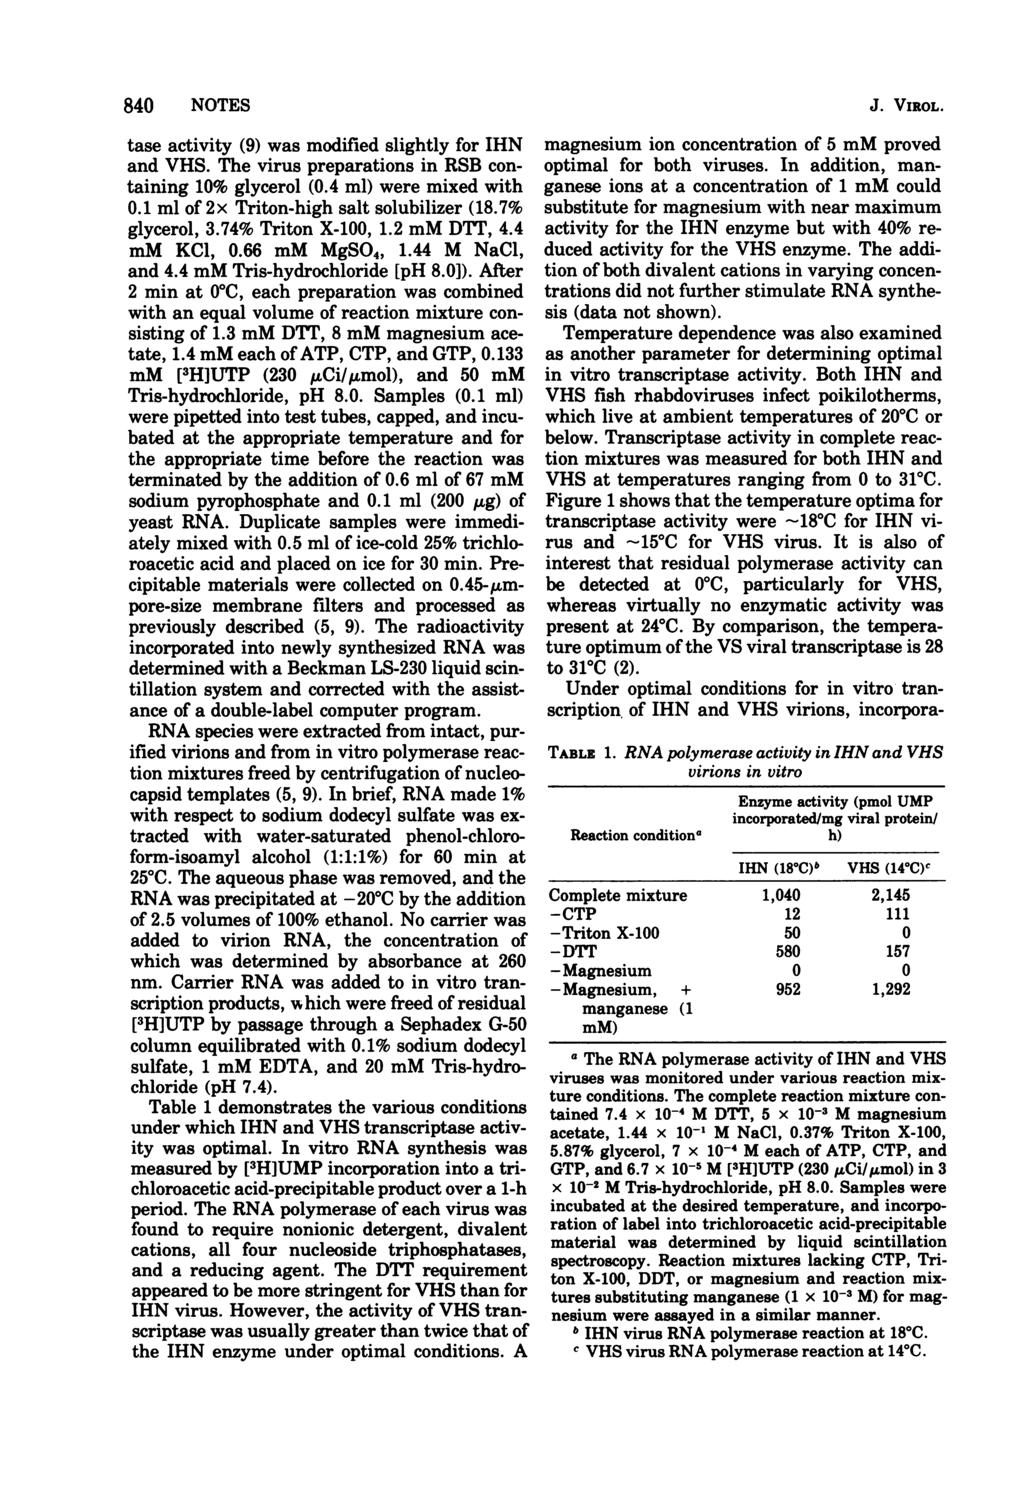 840 NOTES tase activity (9) was modified slightly for IHN and VHS. The virus preparations in RSB containing 10% glycerol (0.4 ml) were mixed with 0.1 ml of 2x Triton-high salt solubilizer (18.